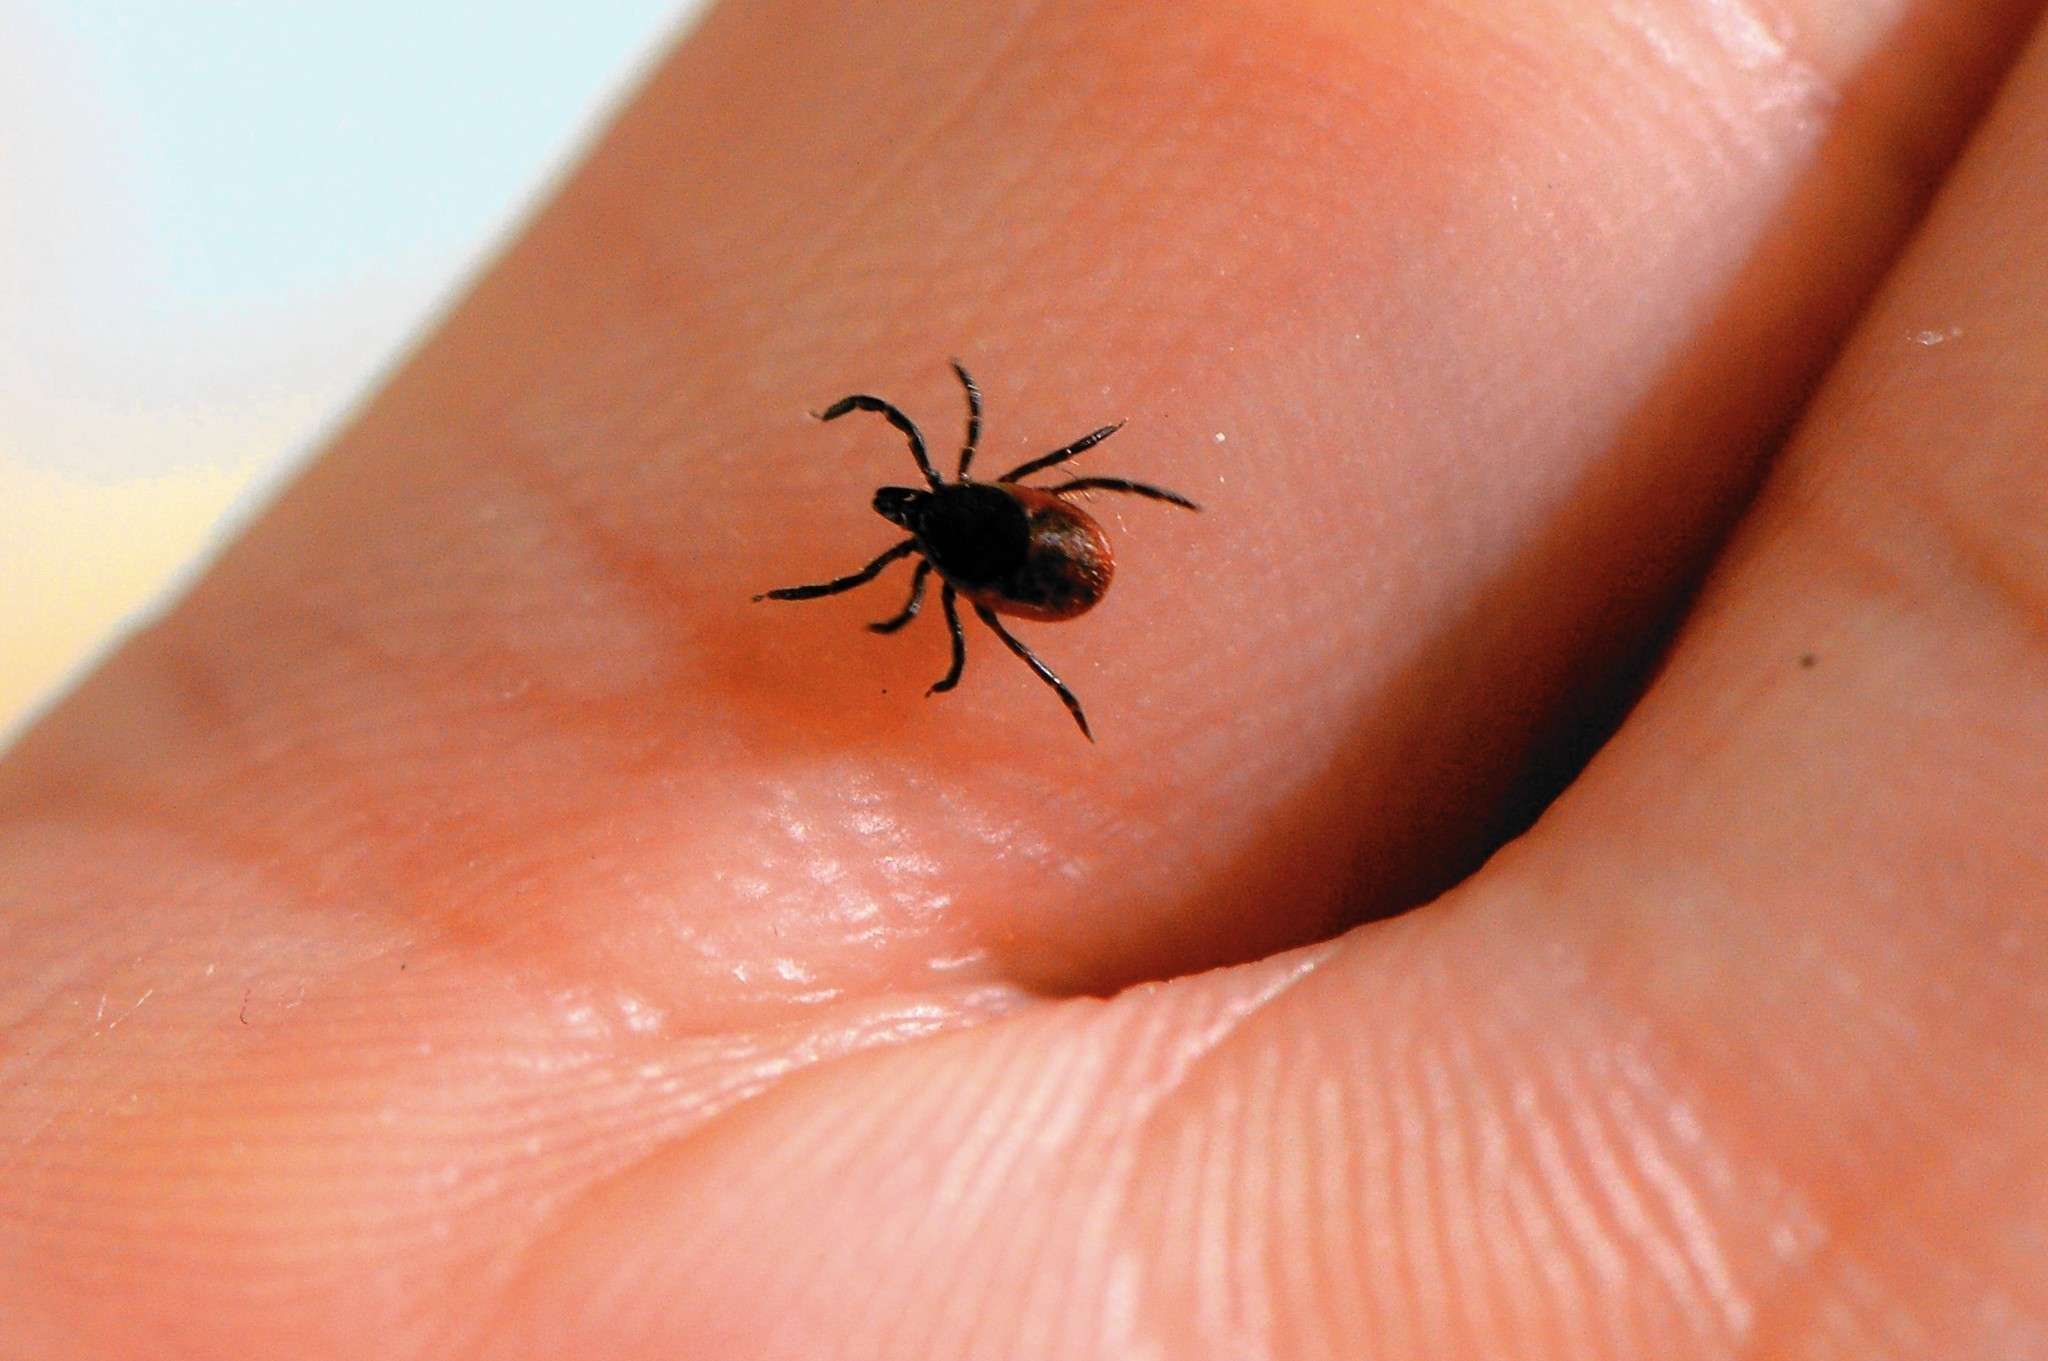 New research finds 1 in 5 deer ticks carry Lyme disease in Lehigh ...